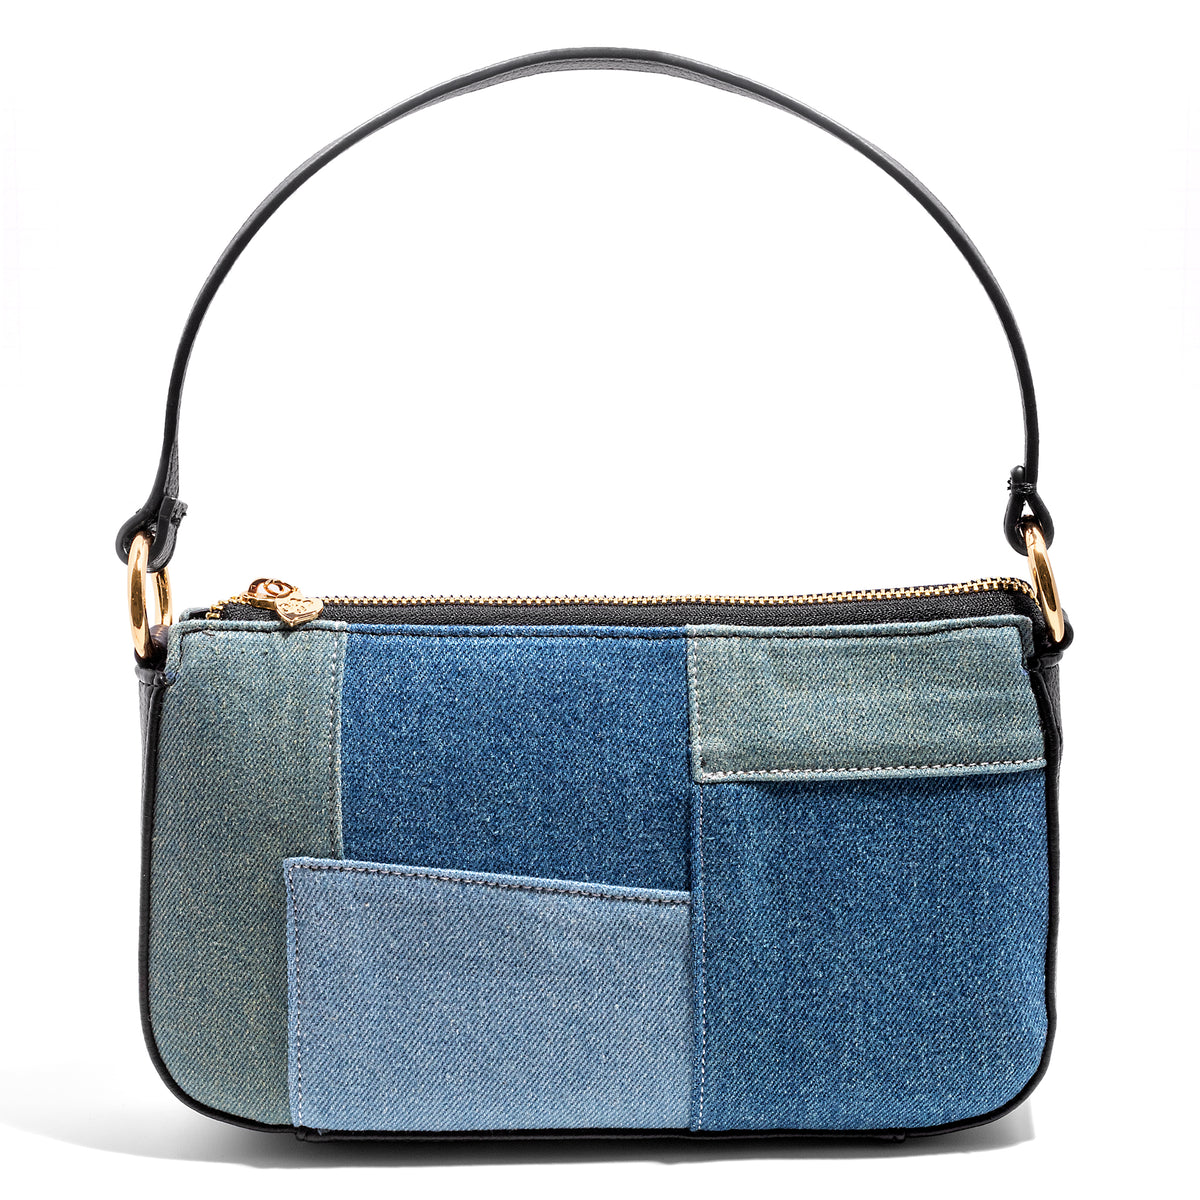 Urban Originals Clutch Bag With Studded Handle in Blue